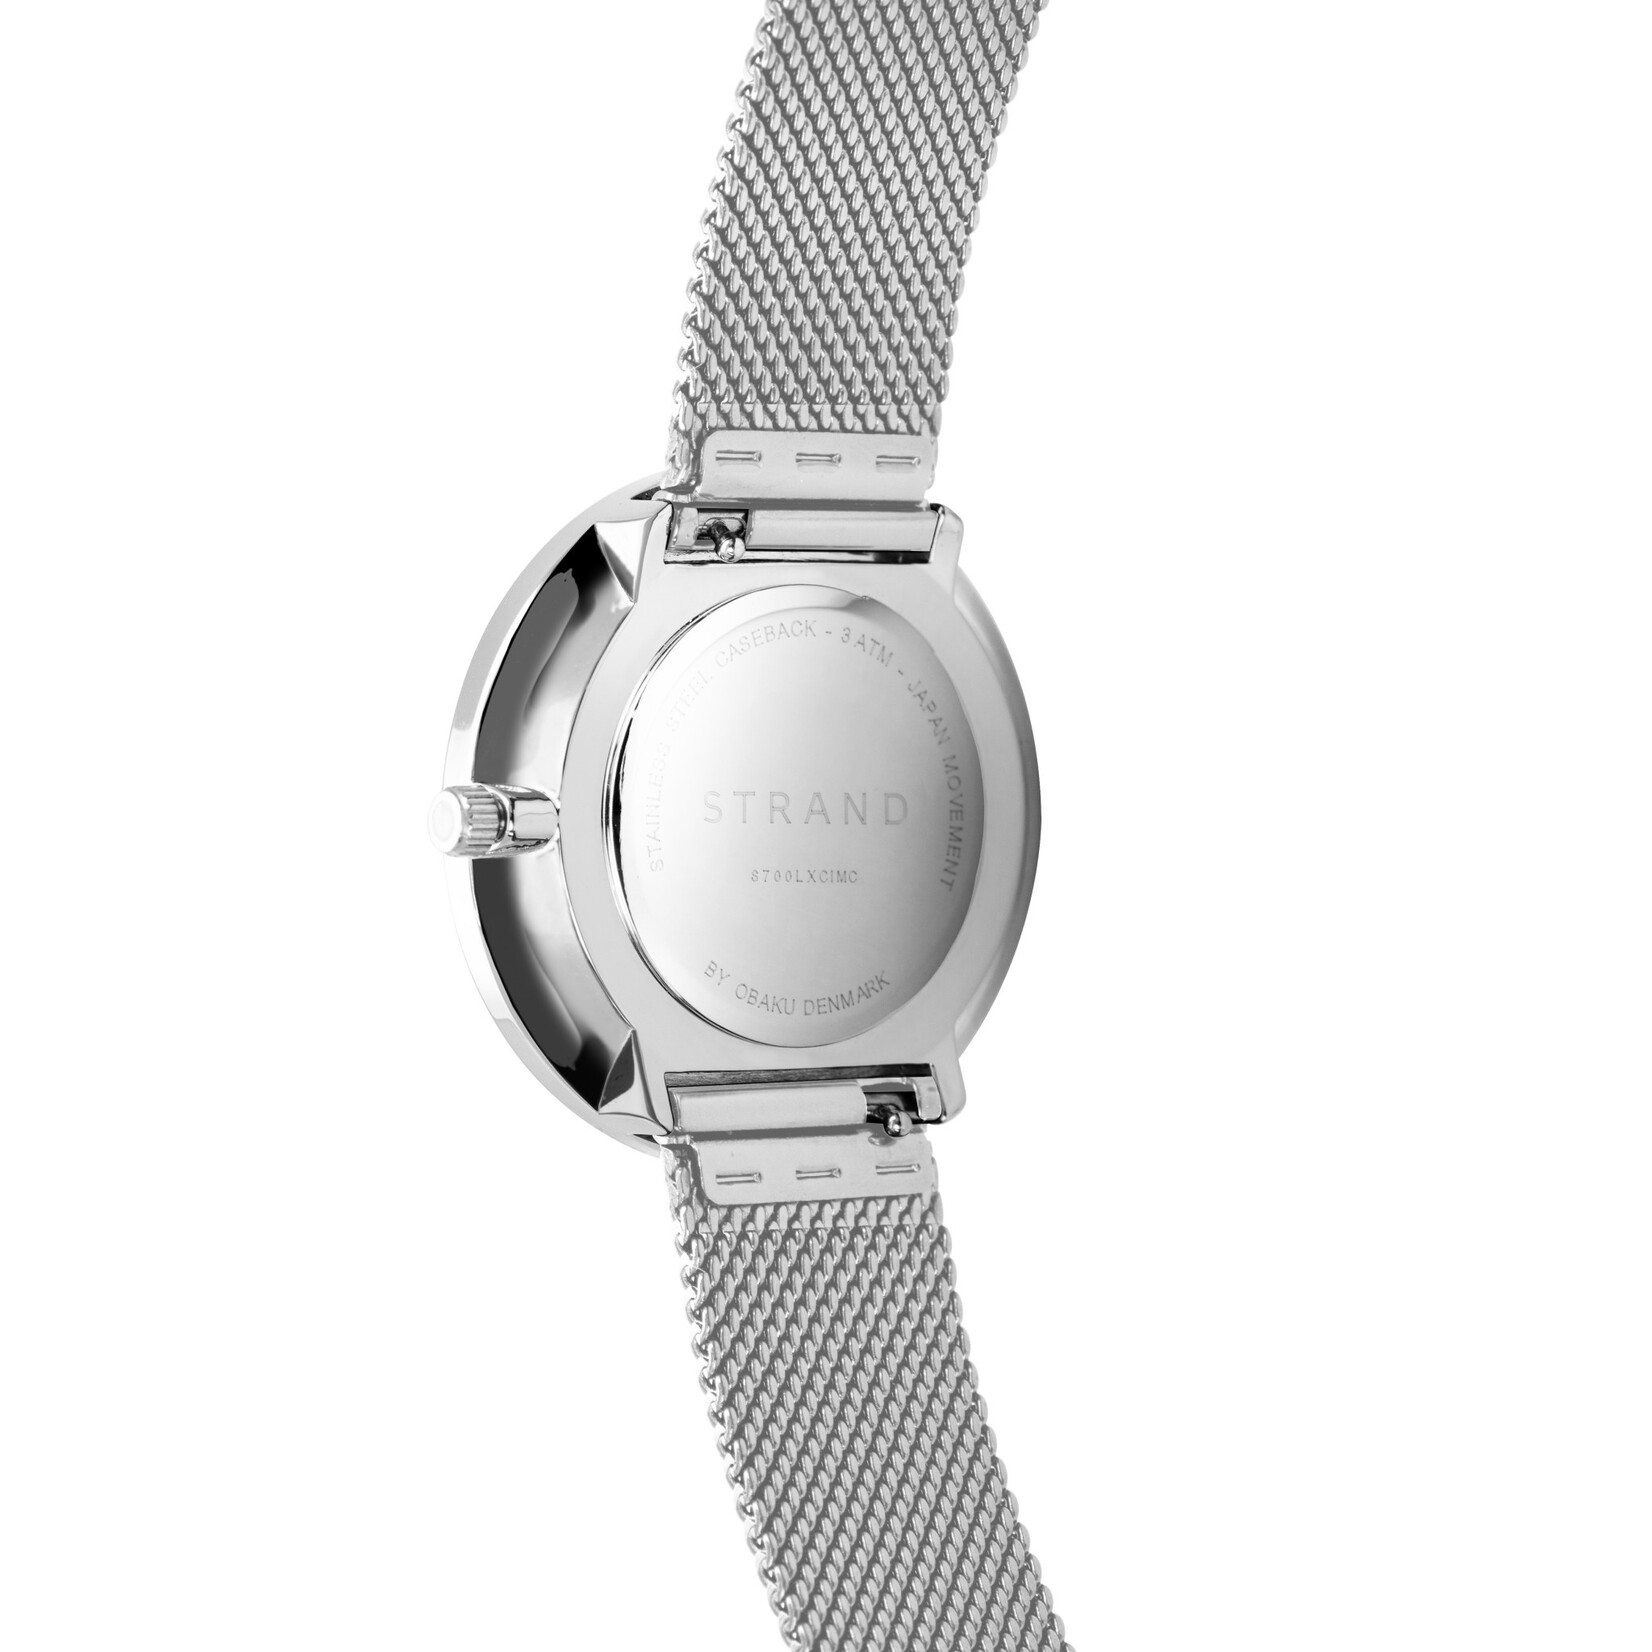 STRAND STRAND Silvertone case White Dial/ Stainless Mesh Band Watch